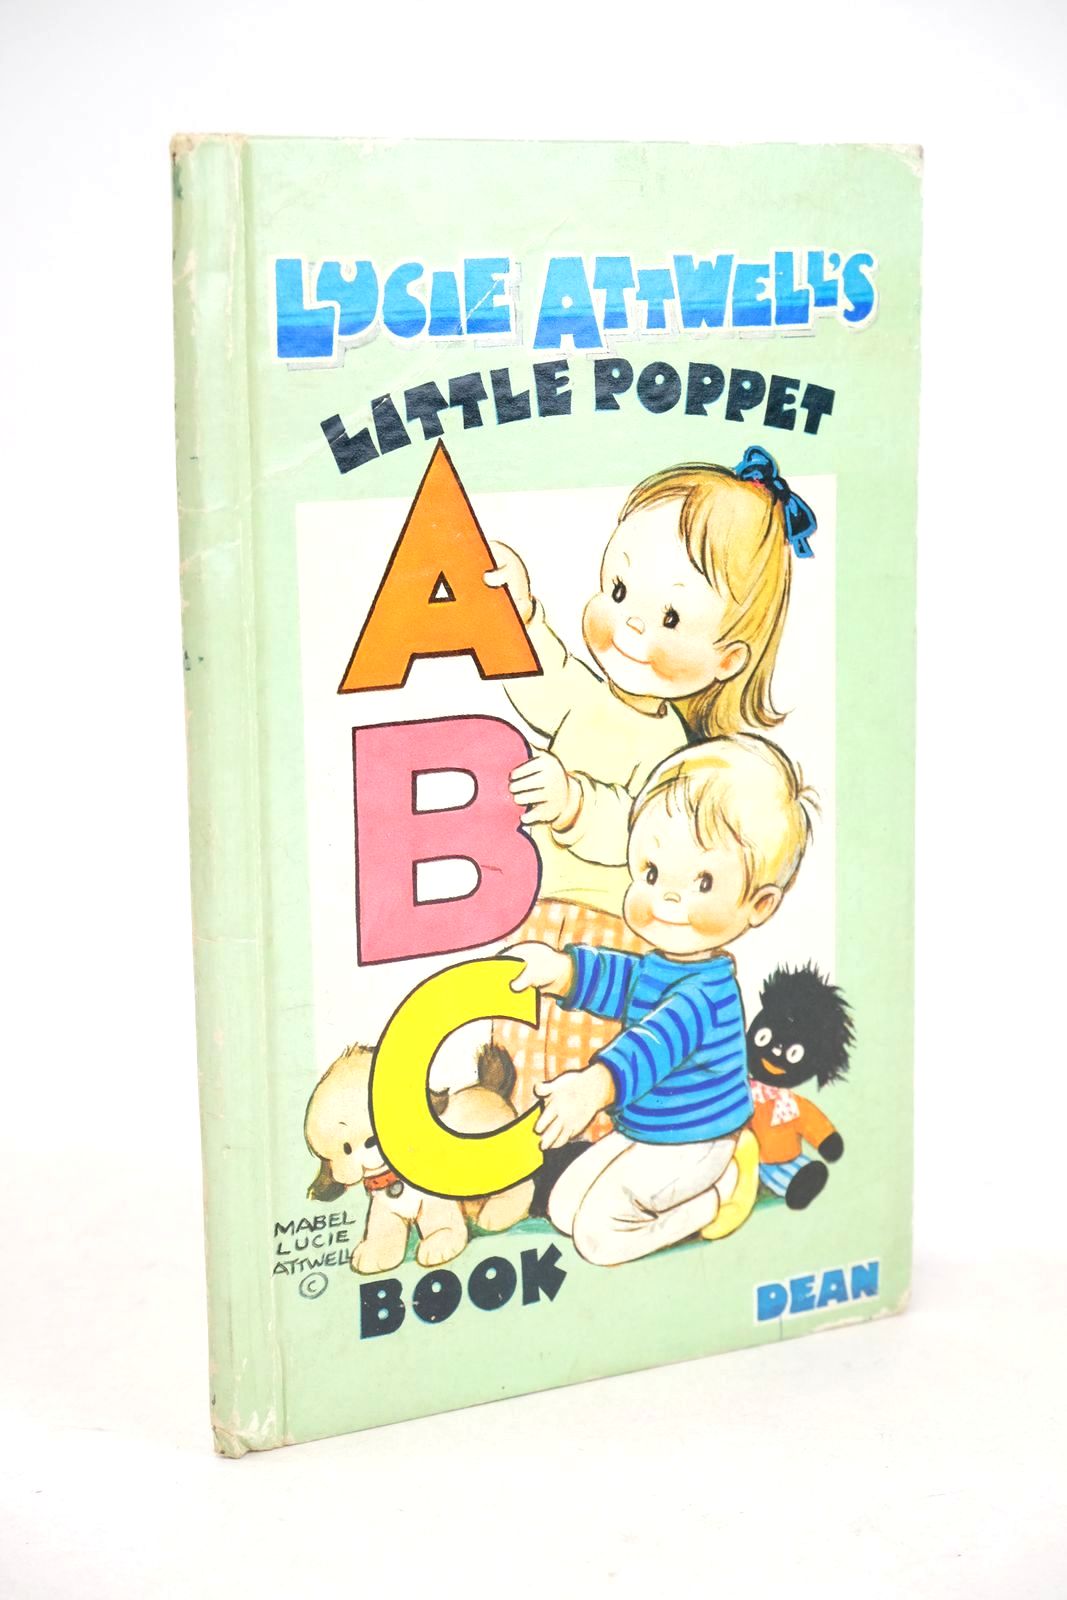 Photo of LUCIE ATTWELL'S LITTLE POPPET ABC BOOK written by Attwell, Mabel Lucie illustrated by Attwell, Mabel Lucie published by Dean &amp; Son Ltd. (STOCK CODE: 1325476)  for sale by Stella & Rose's Books